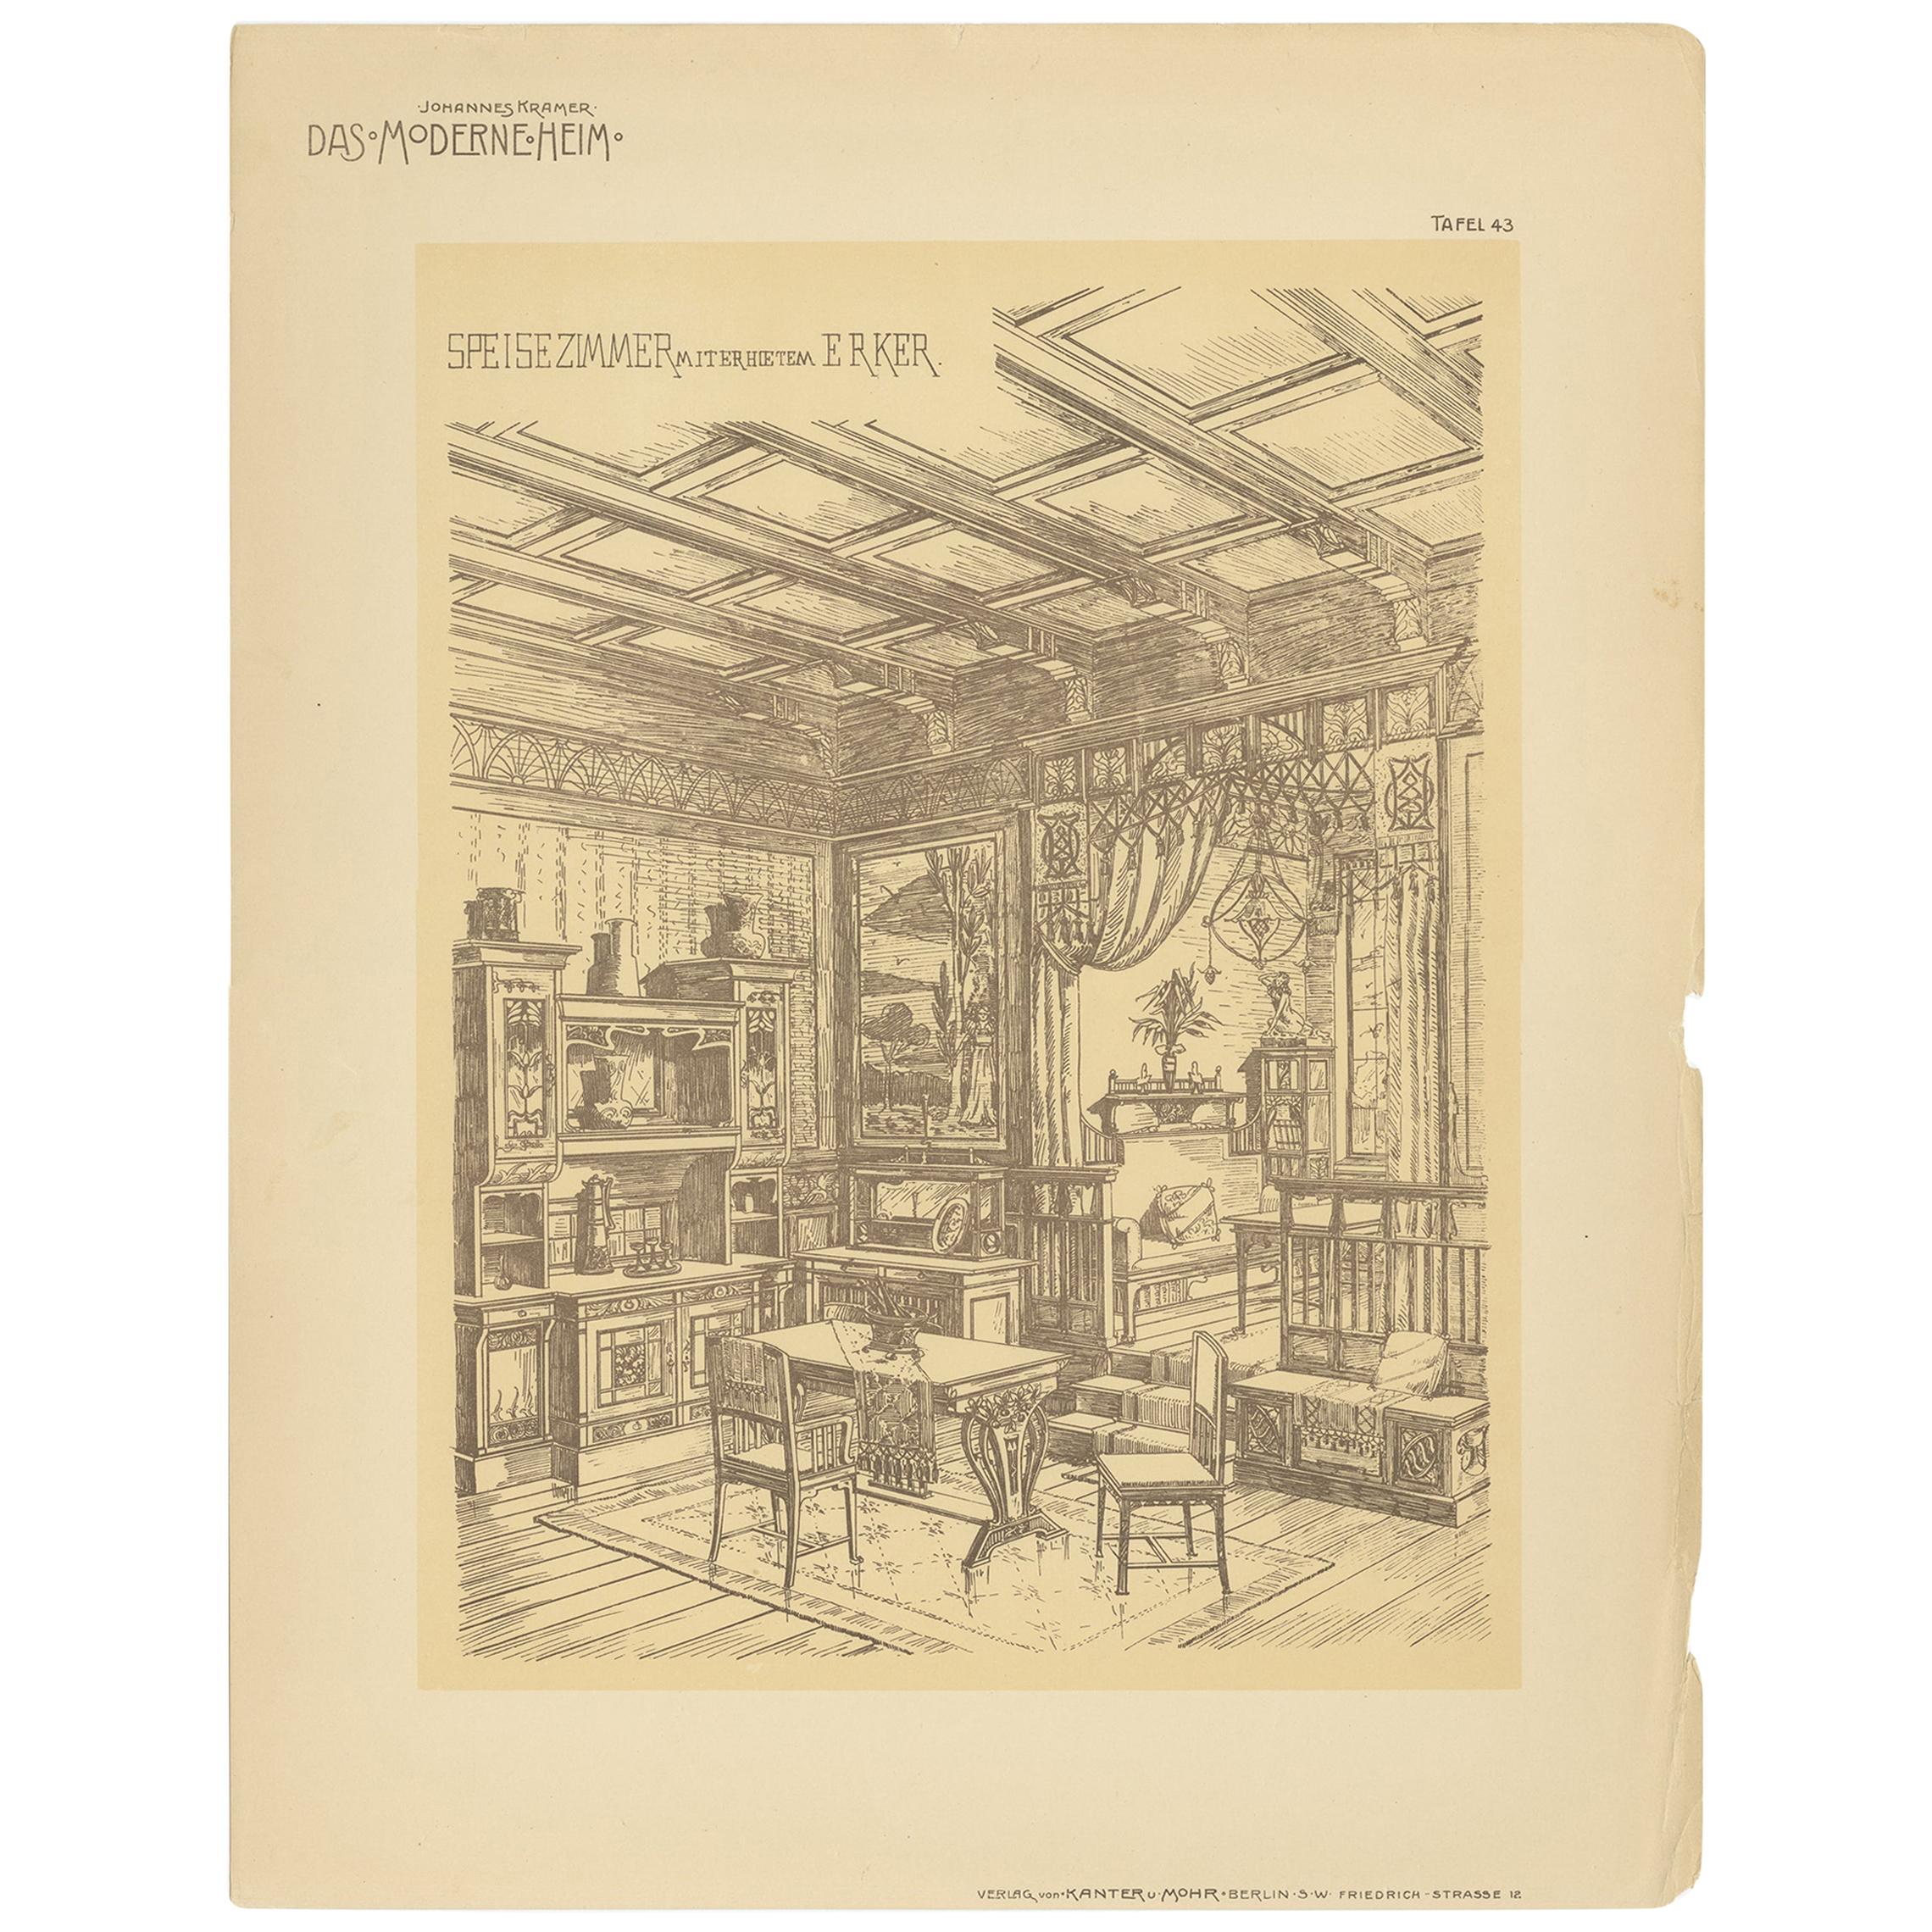 Pl. 43 Antique Print of a Dining Room with Bay Window by Kramer, circa 1910